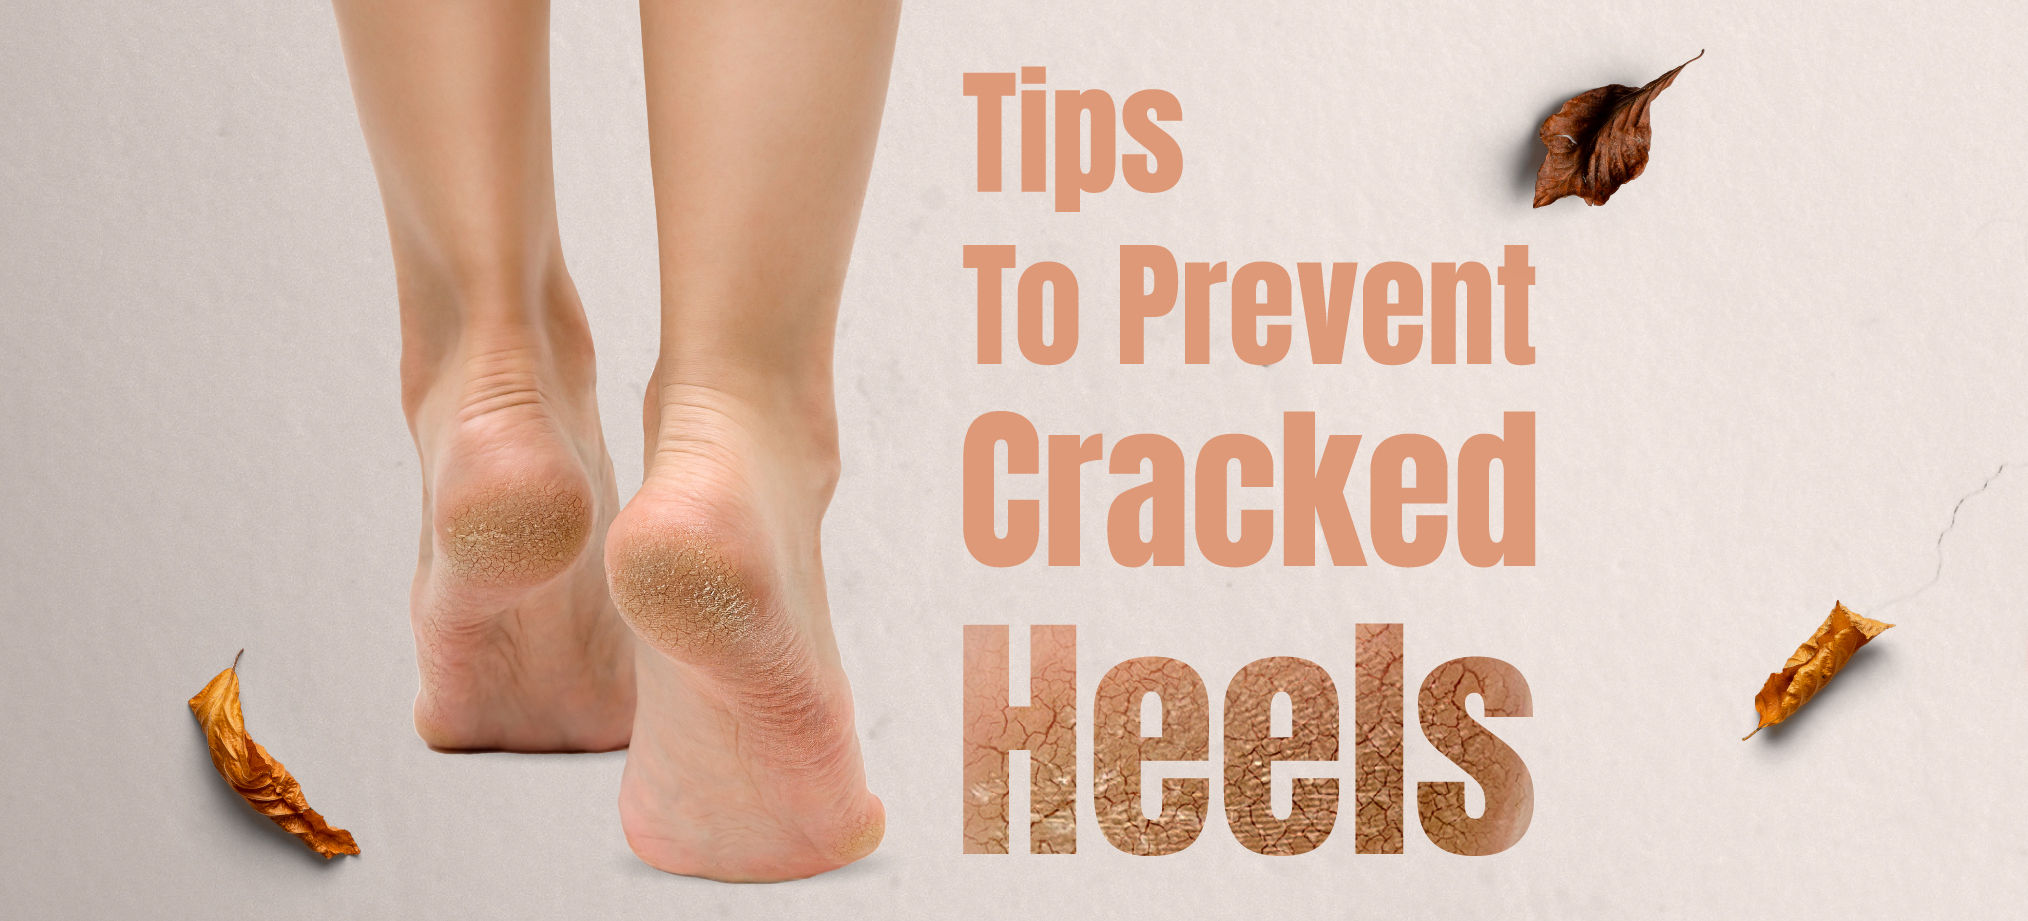 Are Dry, Cracked Heels a Sign of Diabetes? | Cone Health